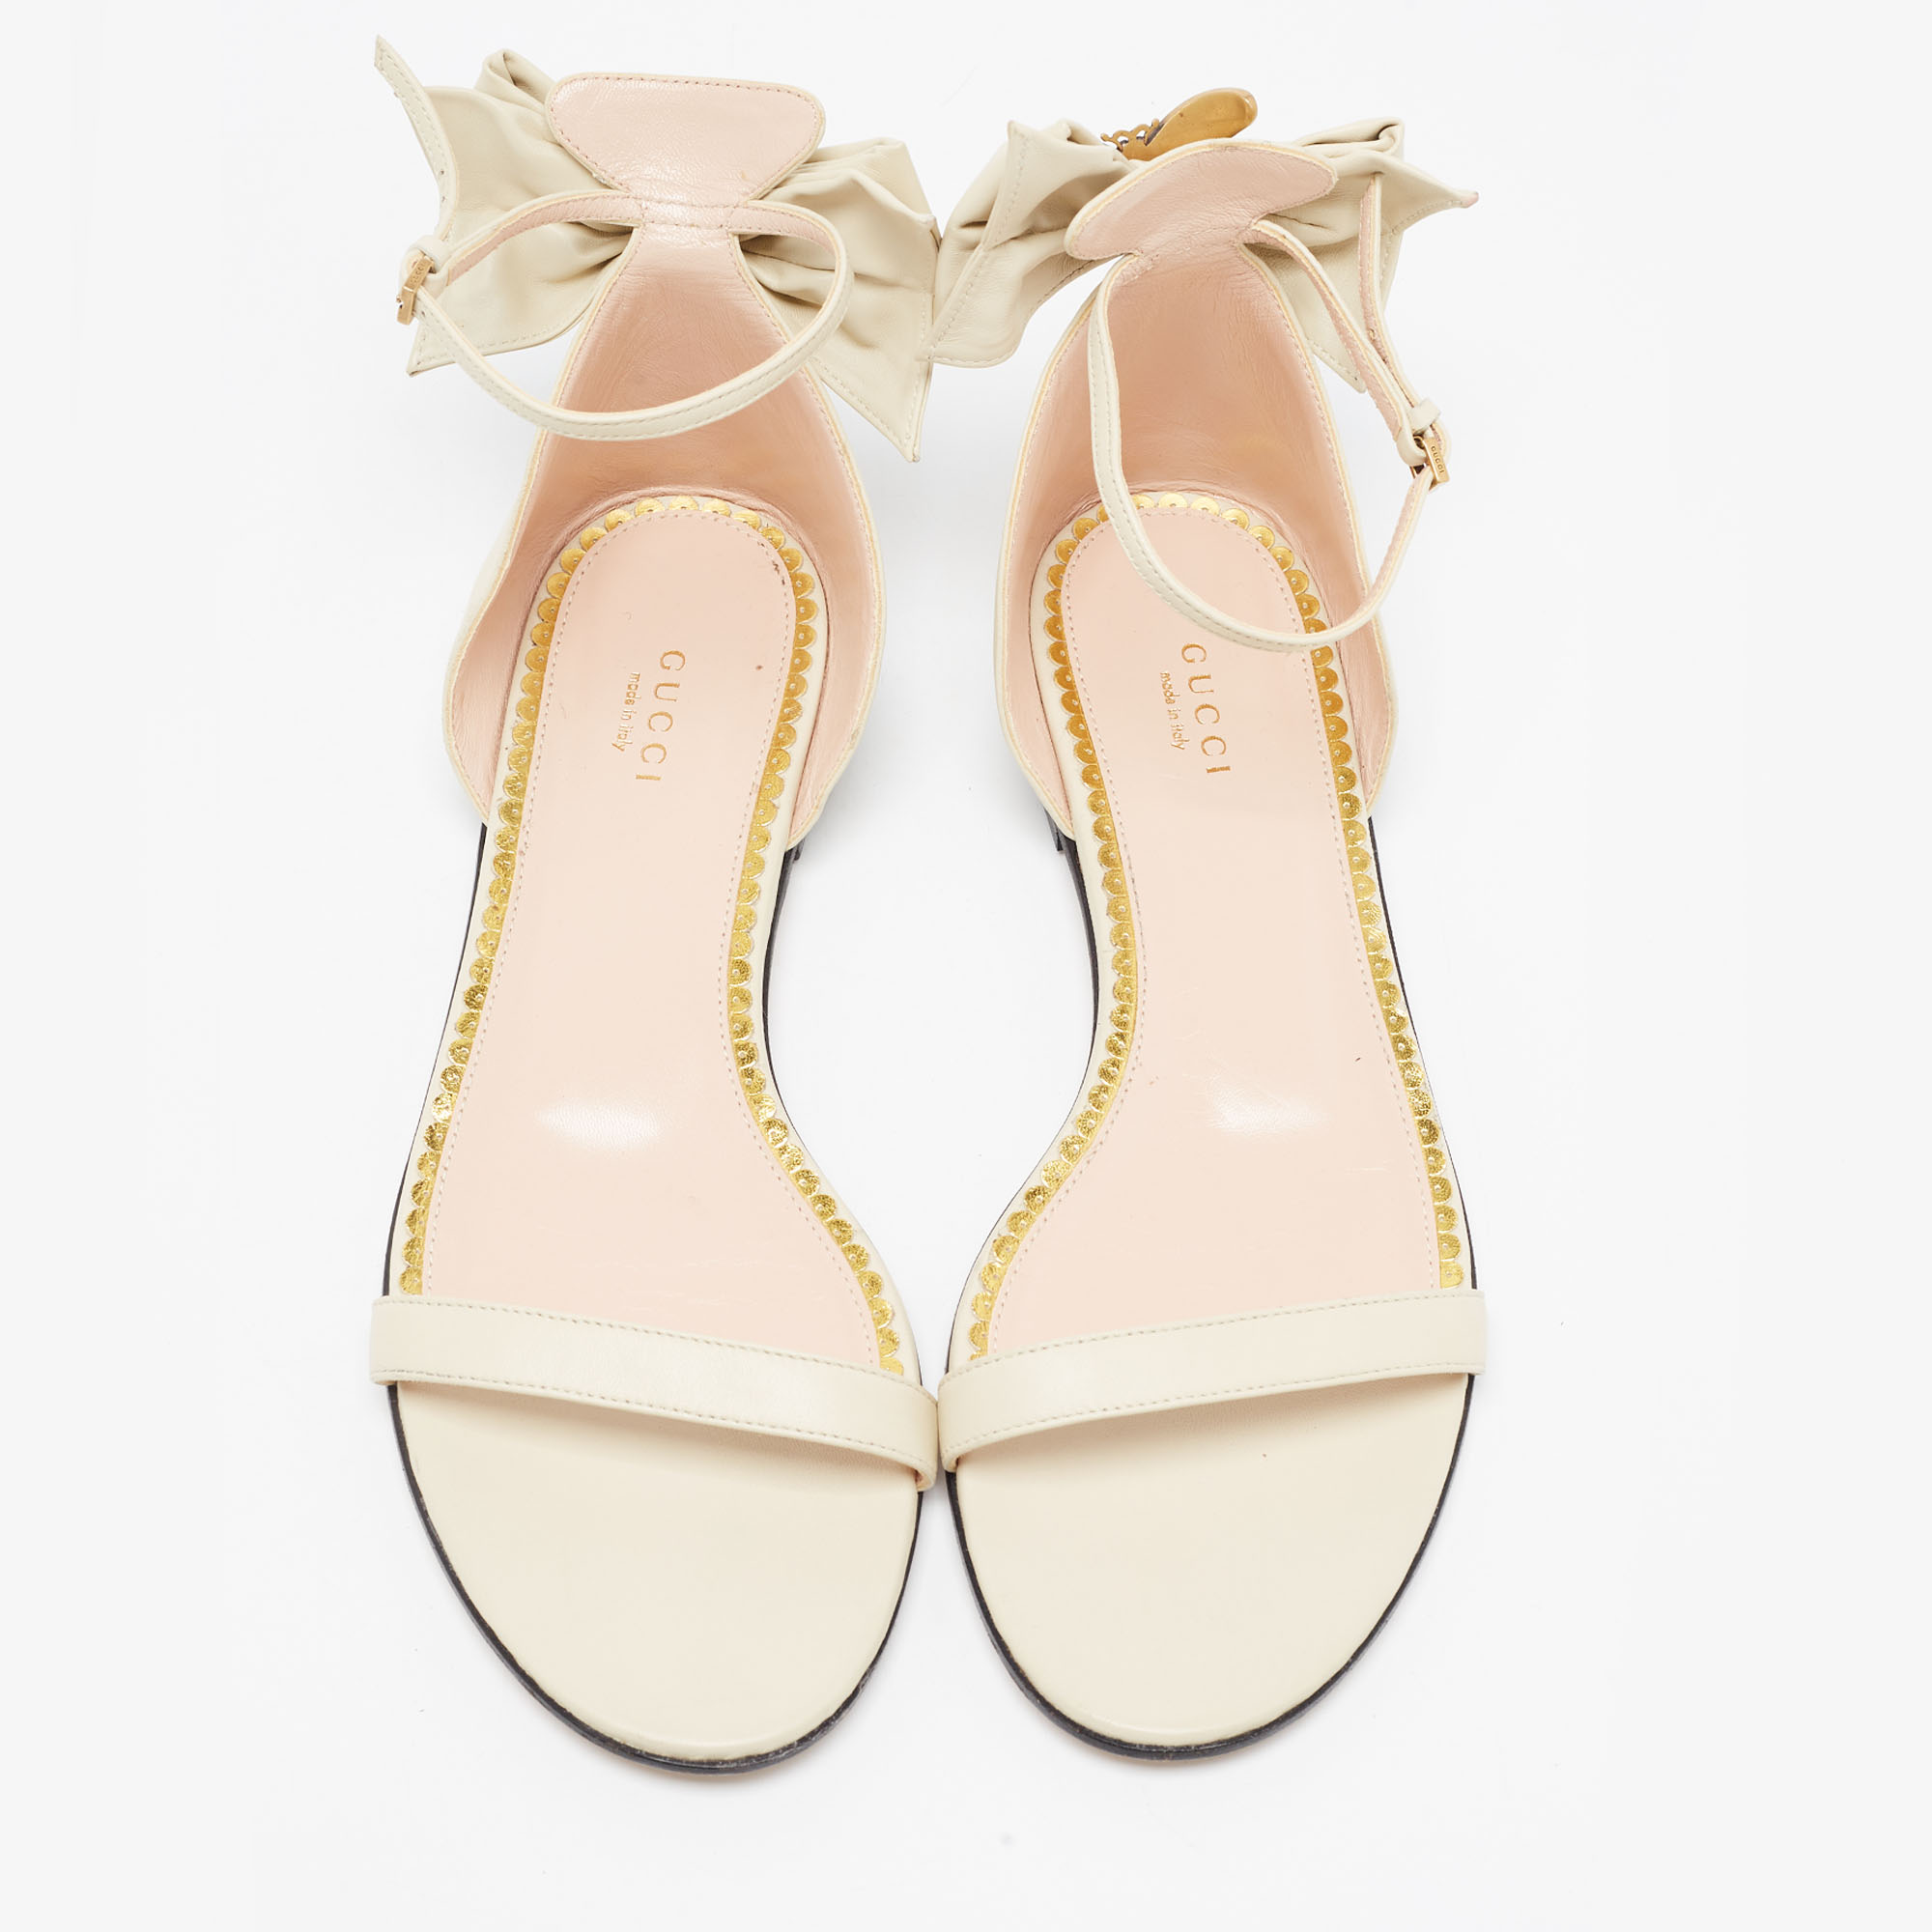 Gucci Cream Leather Embellished Bee Bow Ankle Strap Flat Sandals Size 41